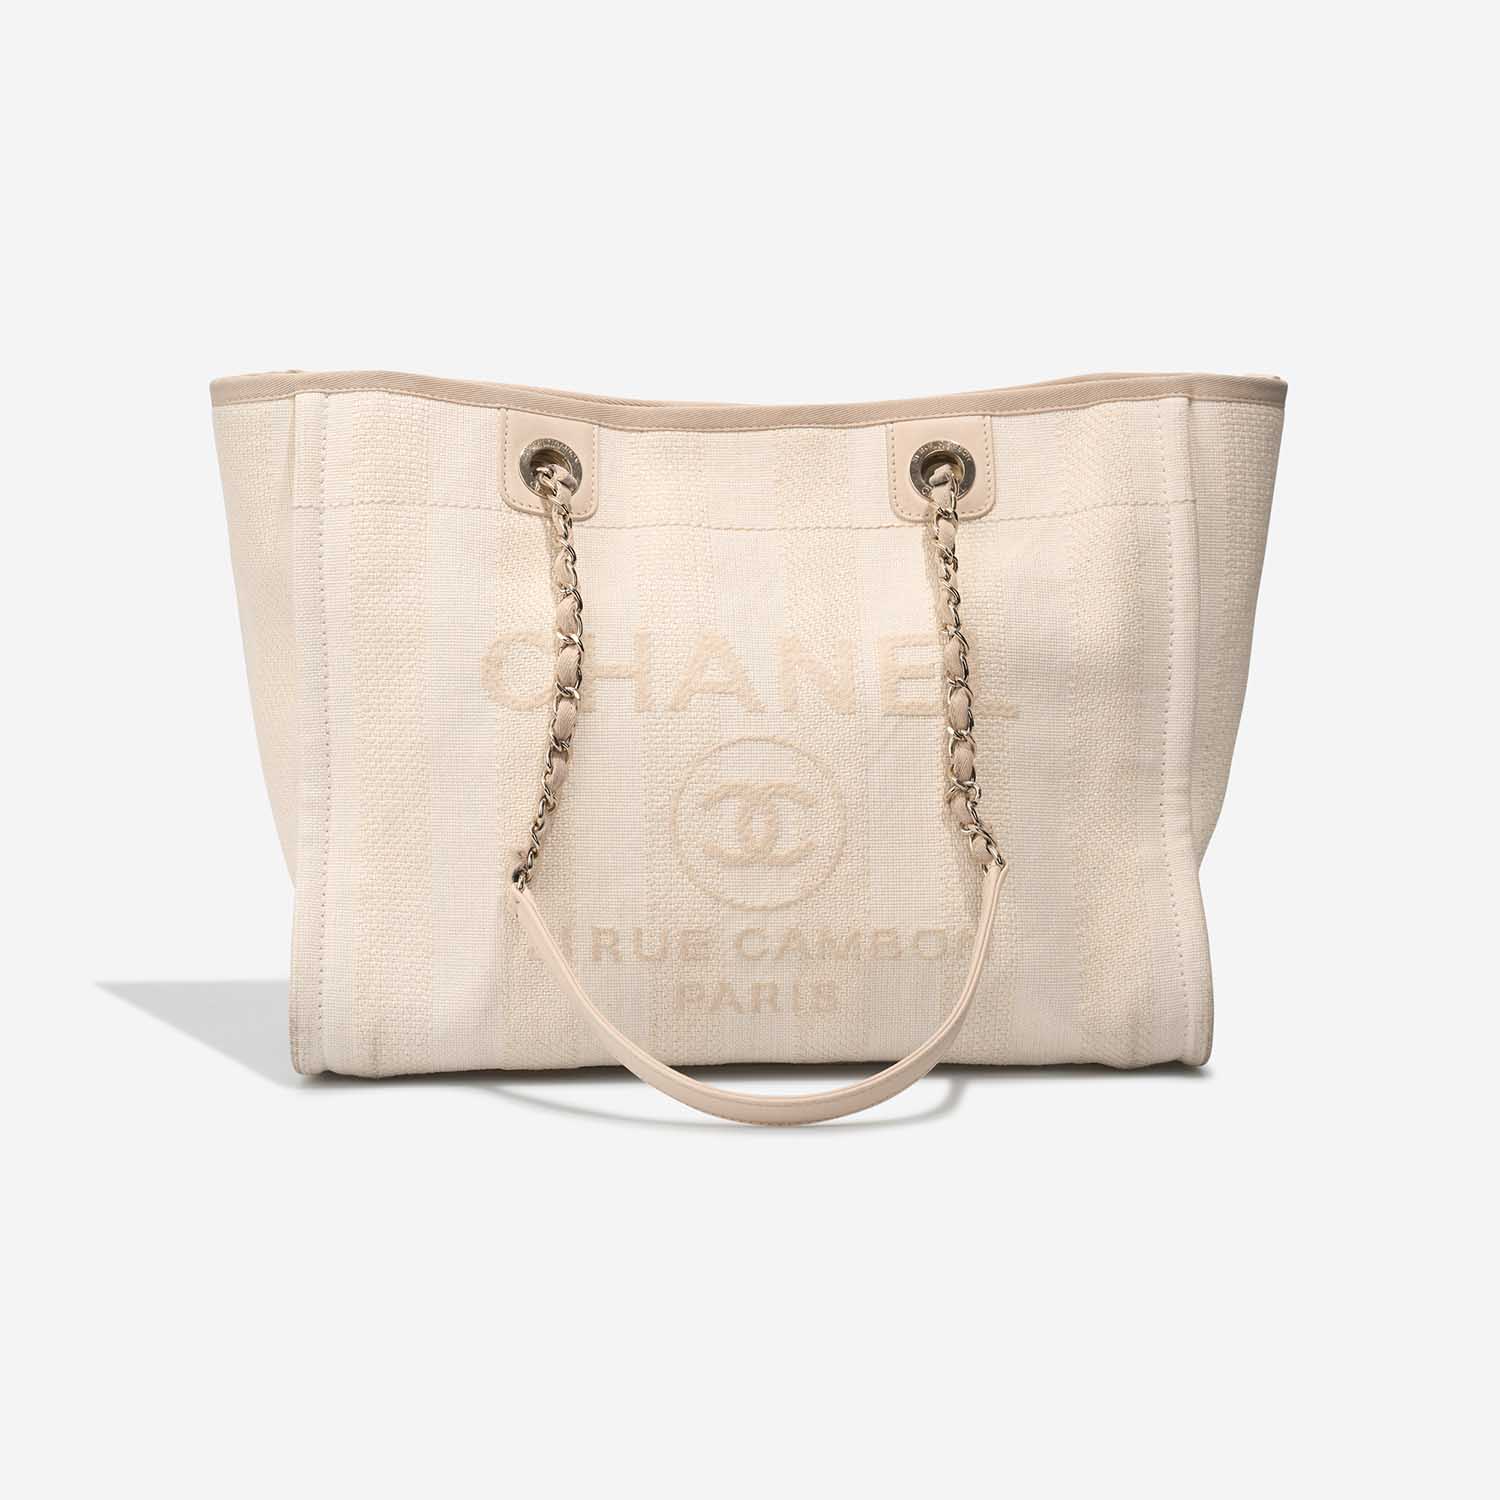 Chanel Deauville Small Canvas Cream Front | Sell your designer bag